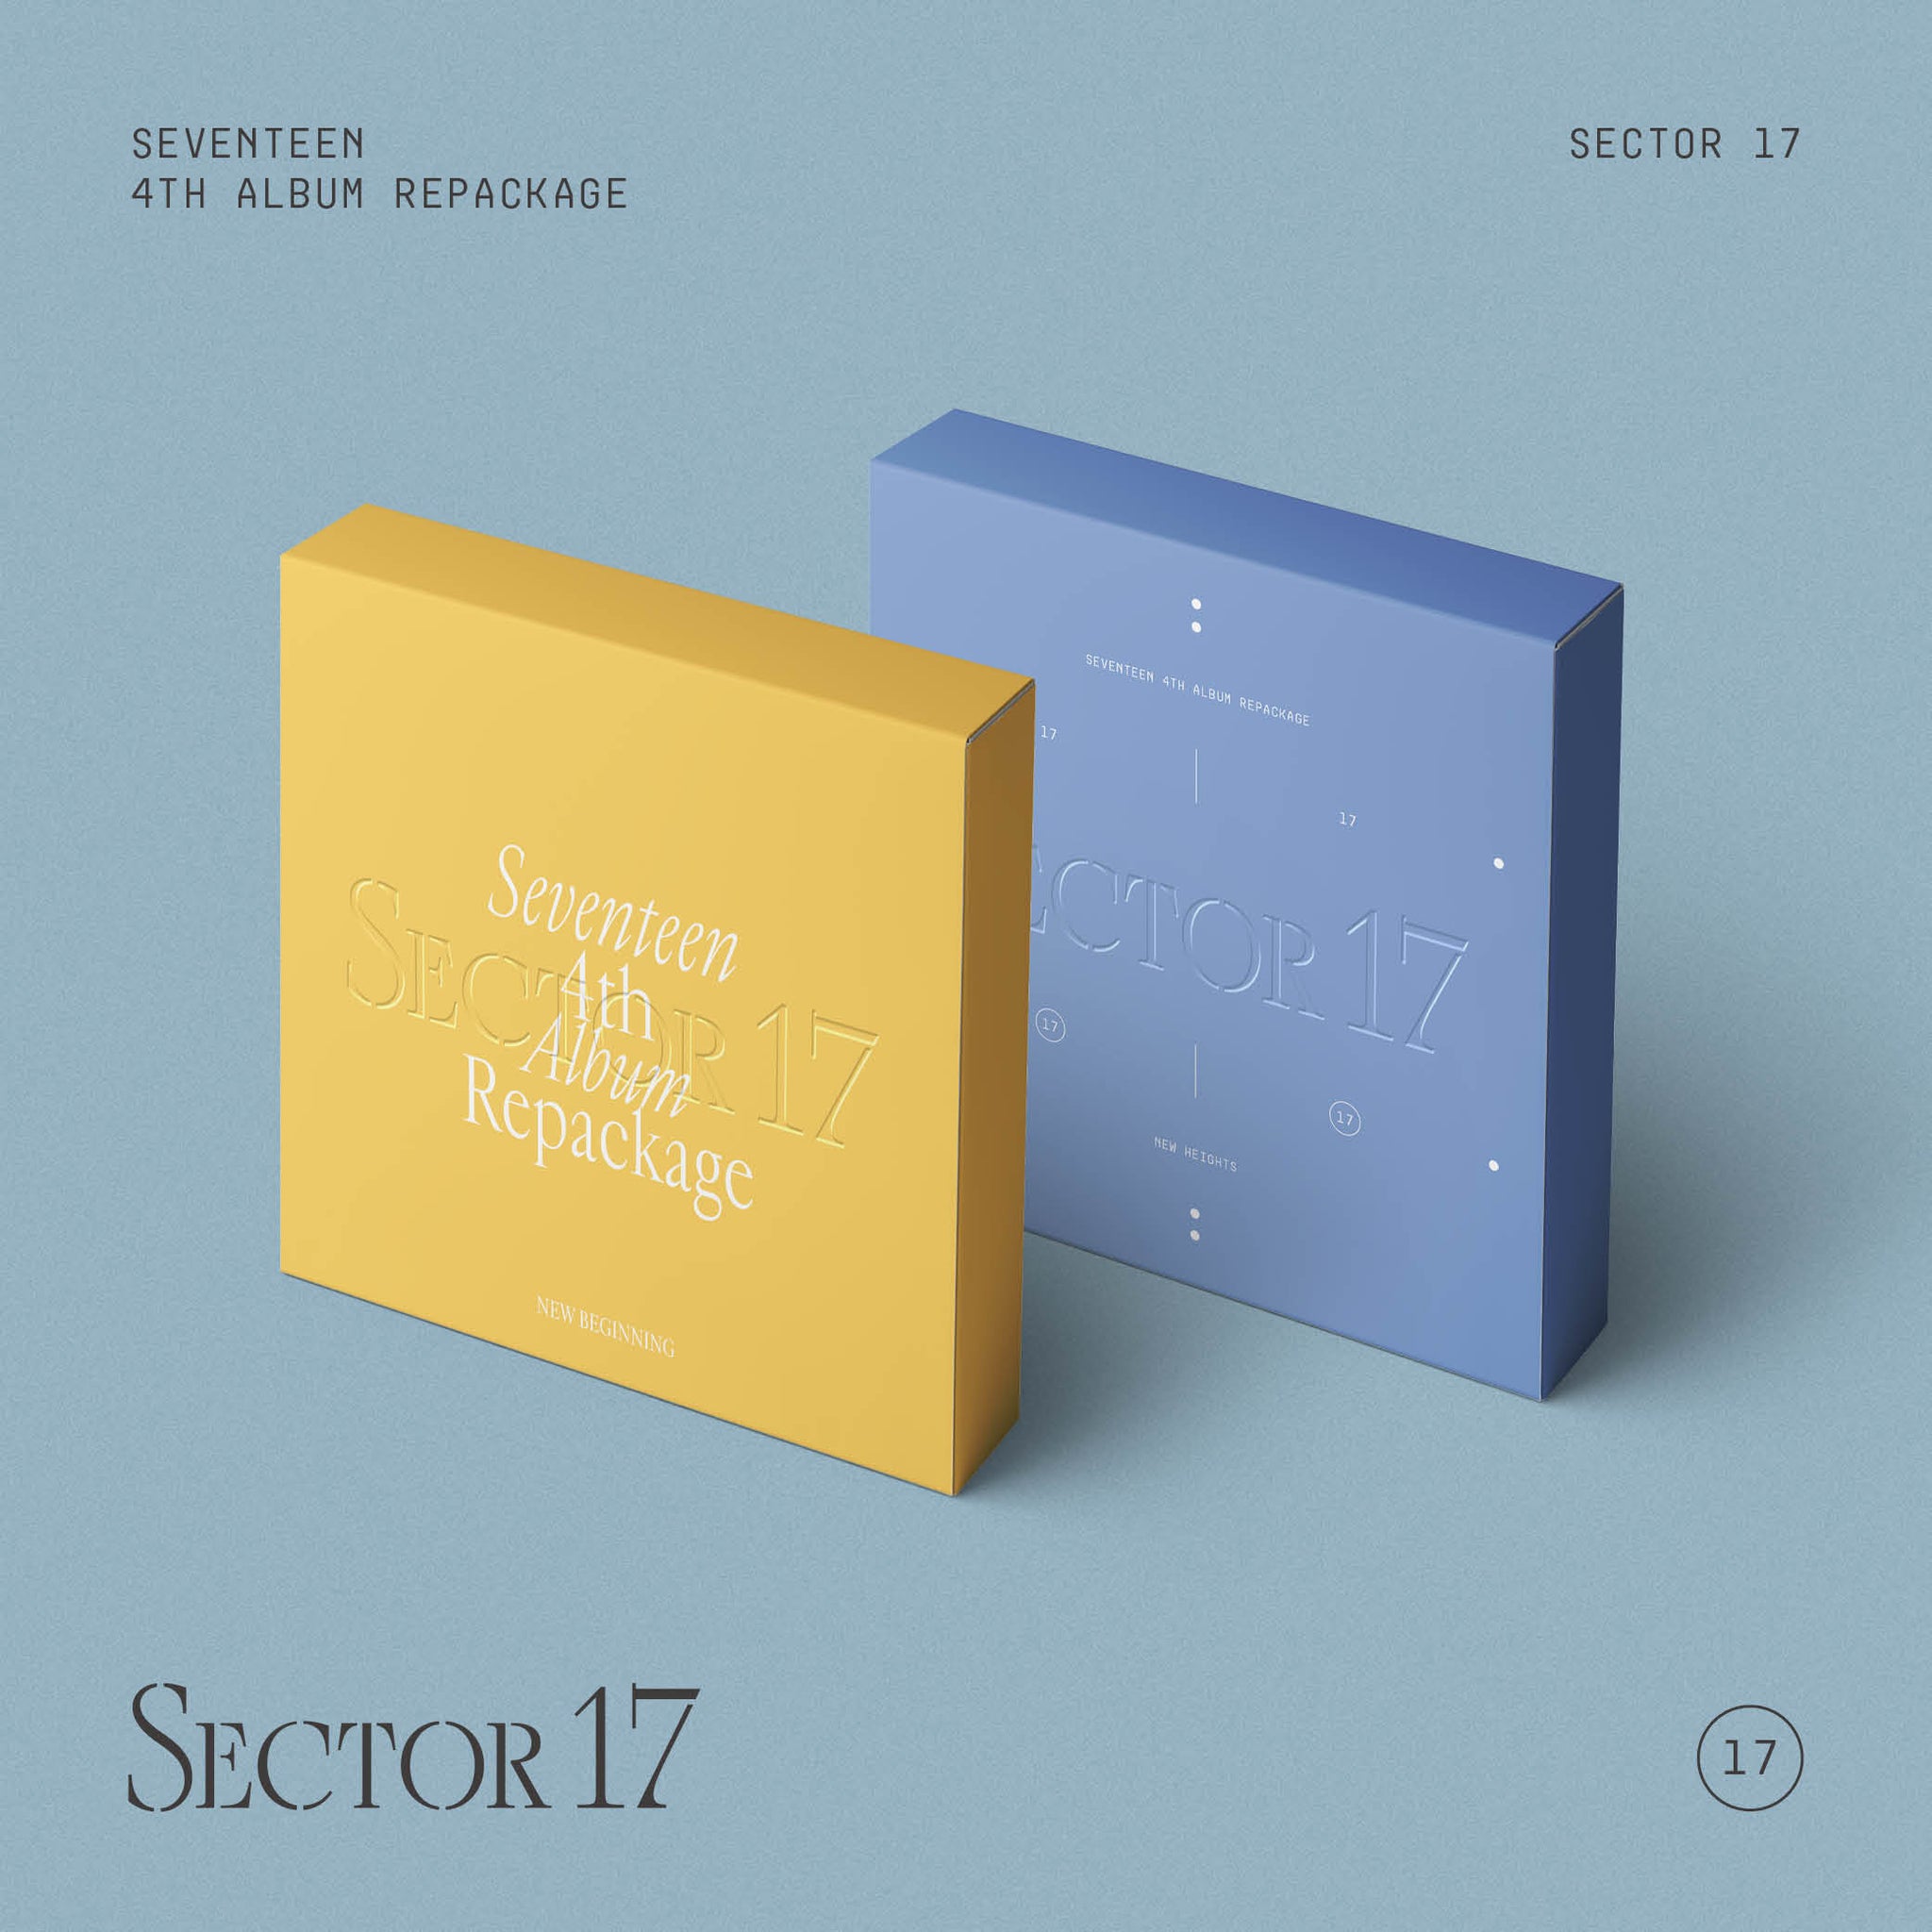 SEVENTEEN 4TH ALBUM REPACKAGE 'SECTOR 17' COVER